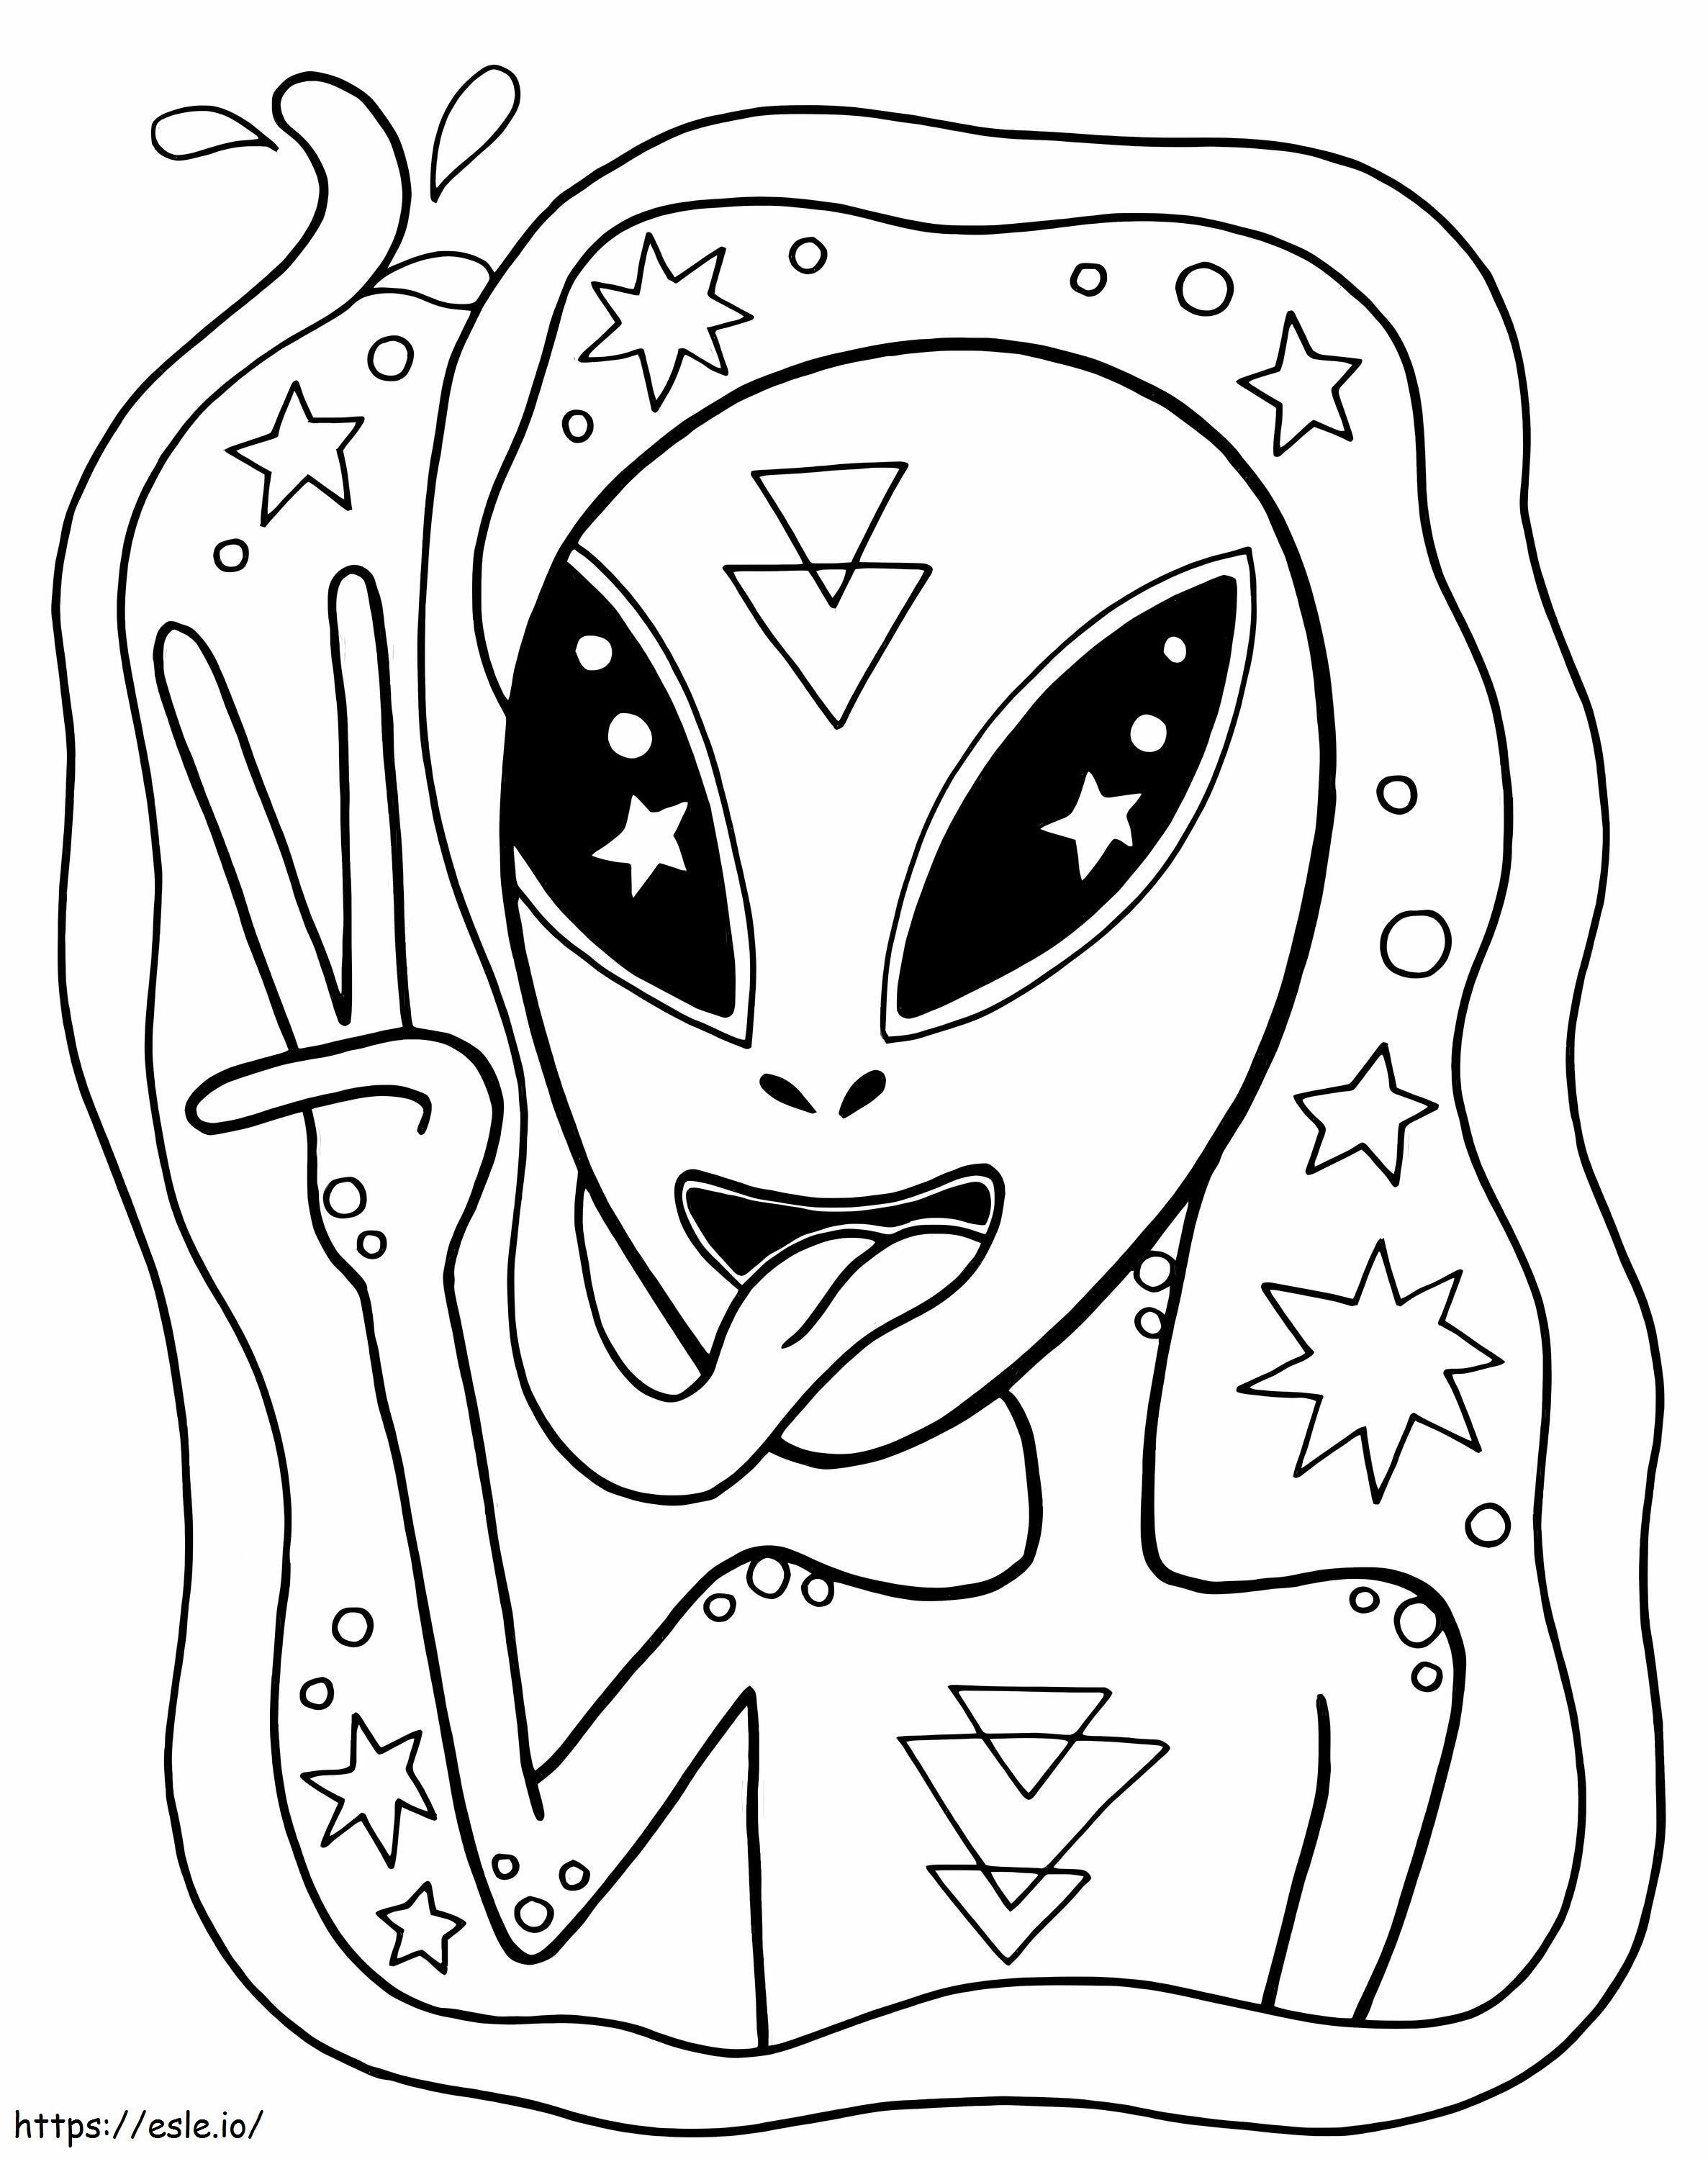 Extraterrestre Trippy coloring page